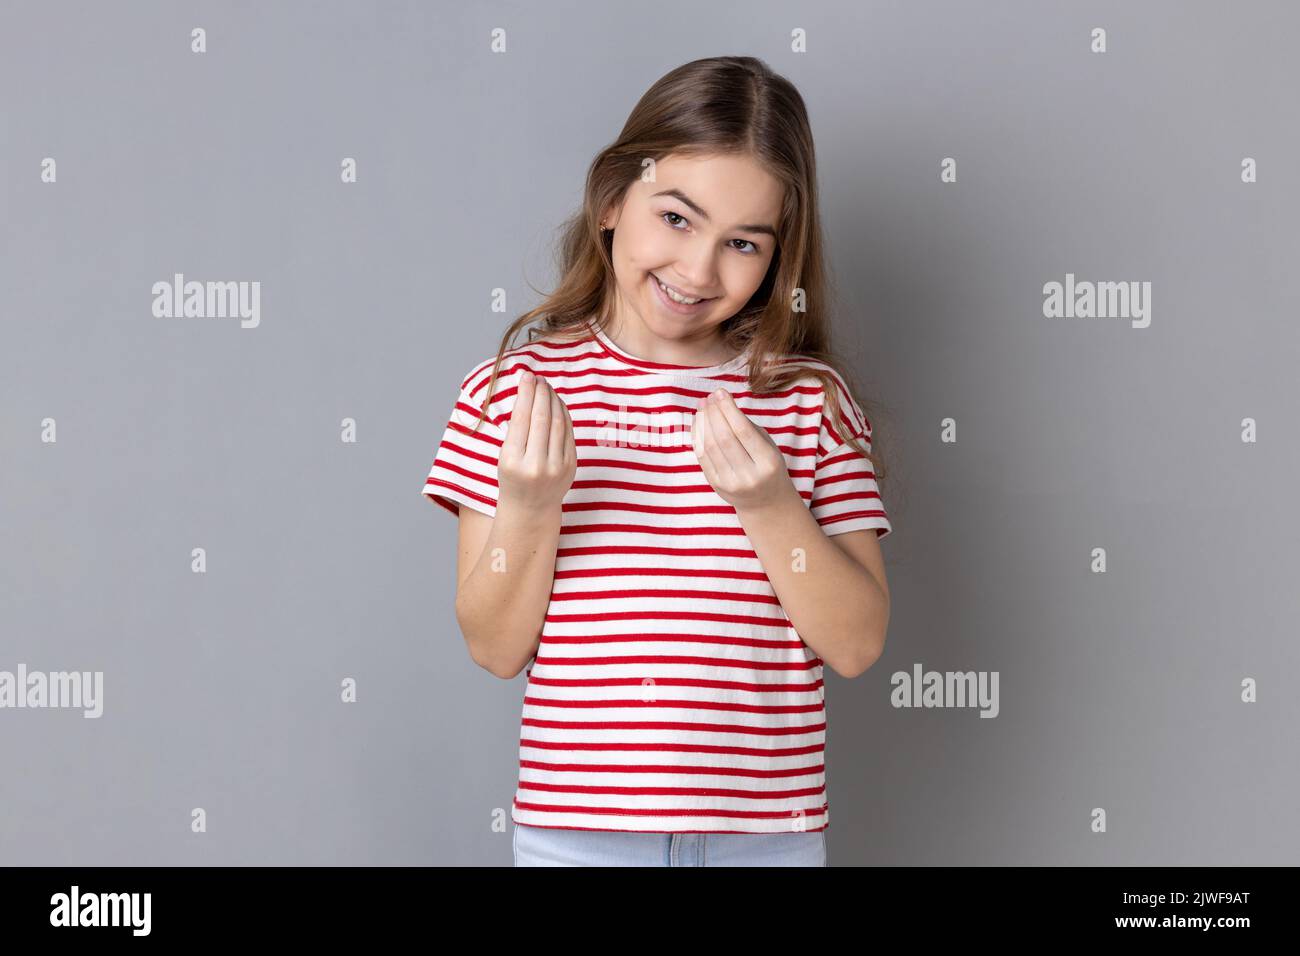 Portrait of smiling little girl wearing striped T-shirt makes money gesture, rubs fingers, looking at camera with glad expression. Indoor studio shot isolated on gray background. Stock Photo